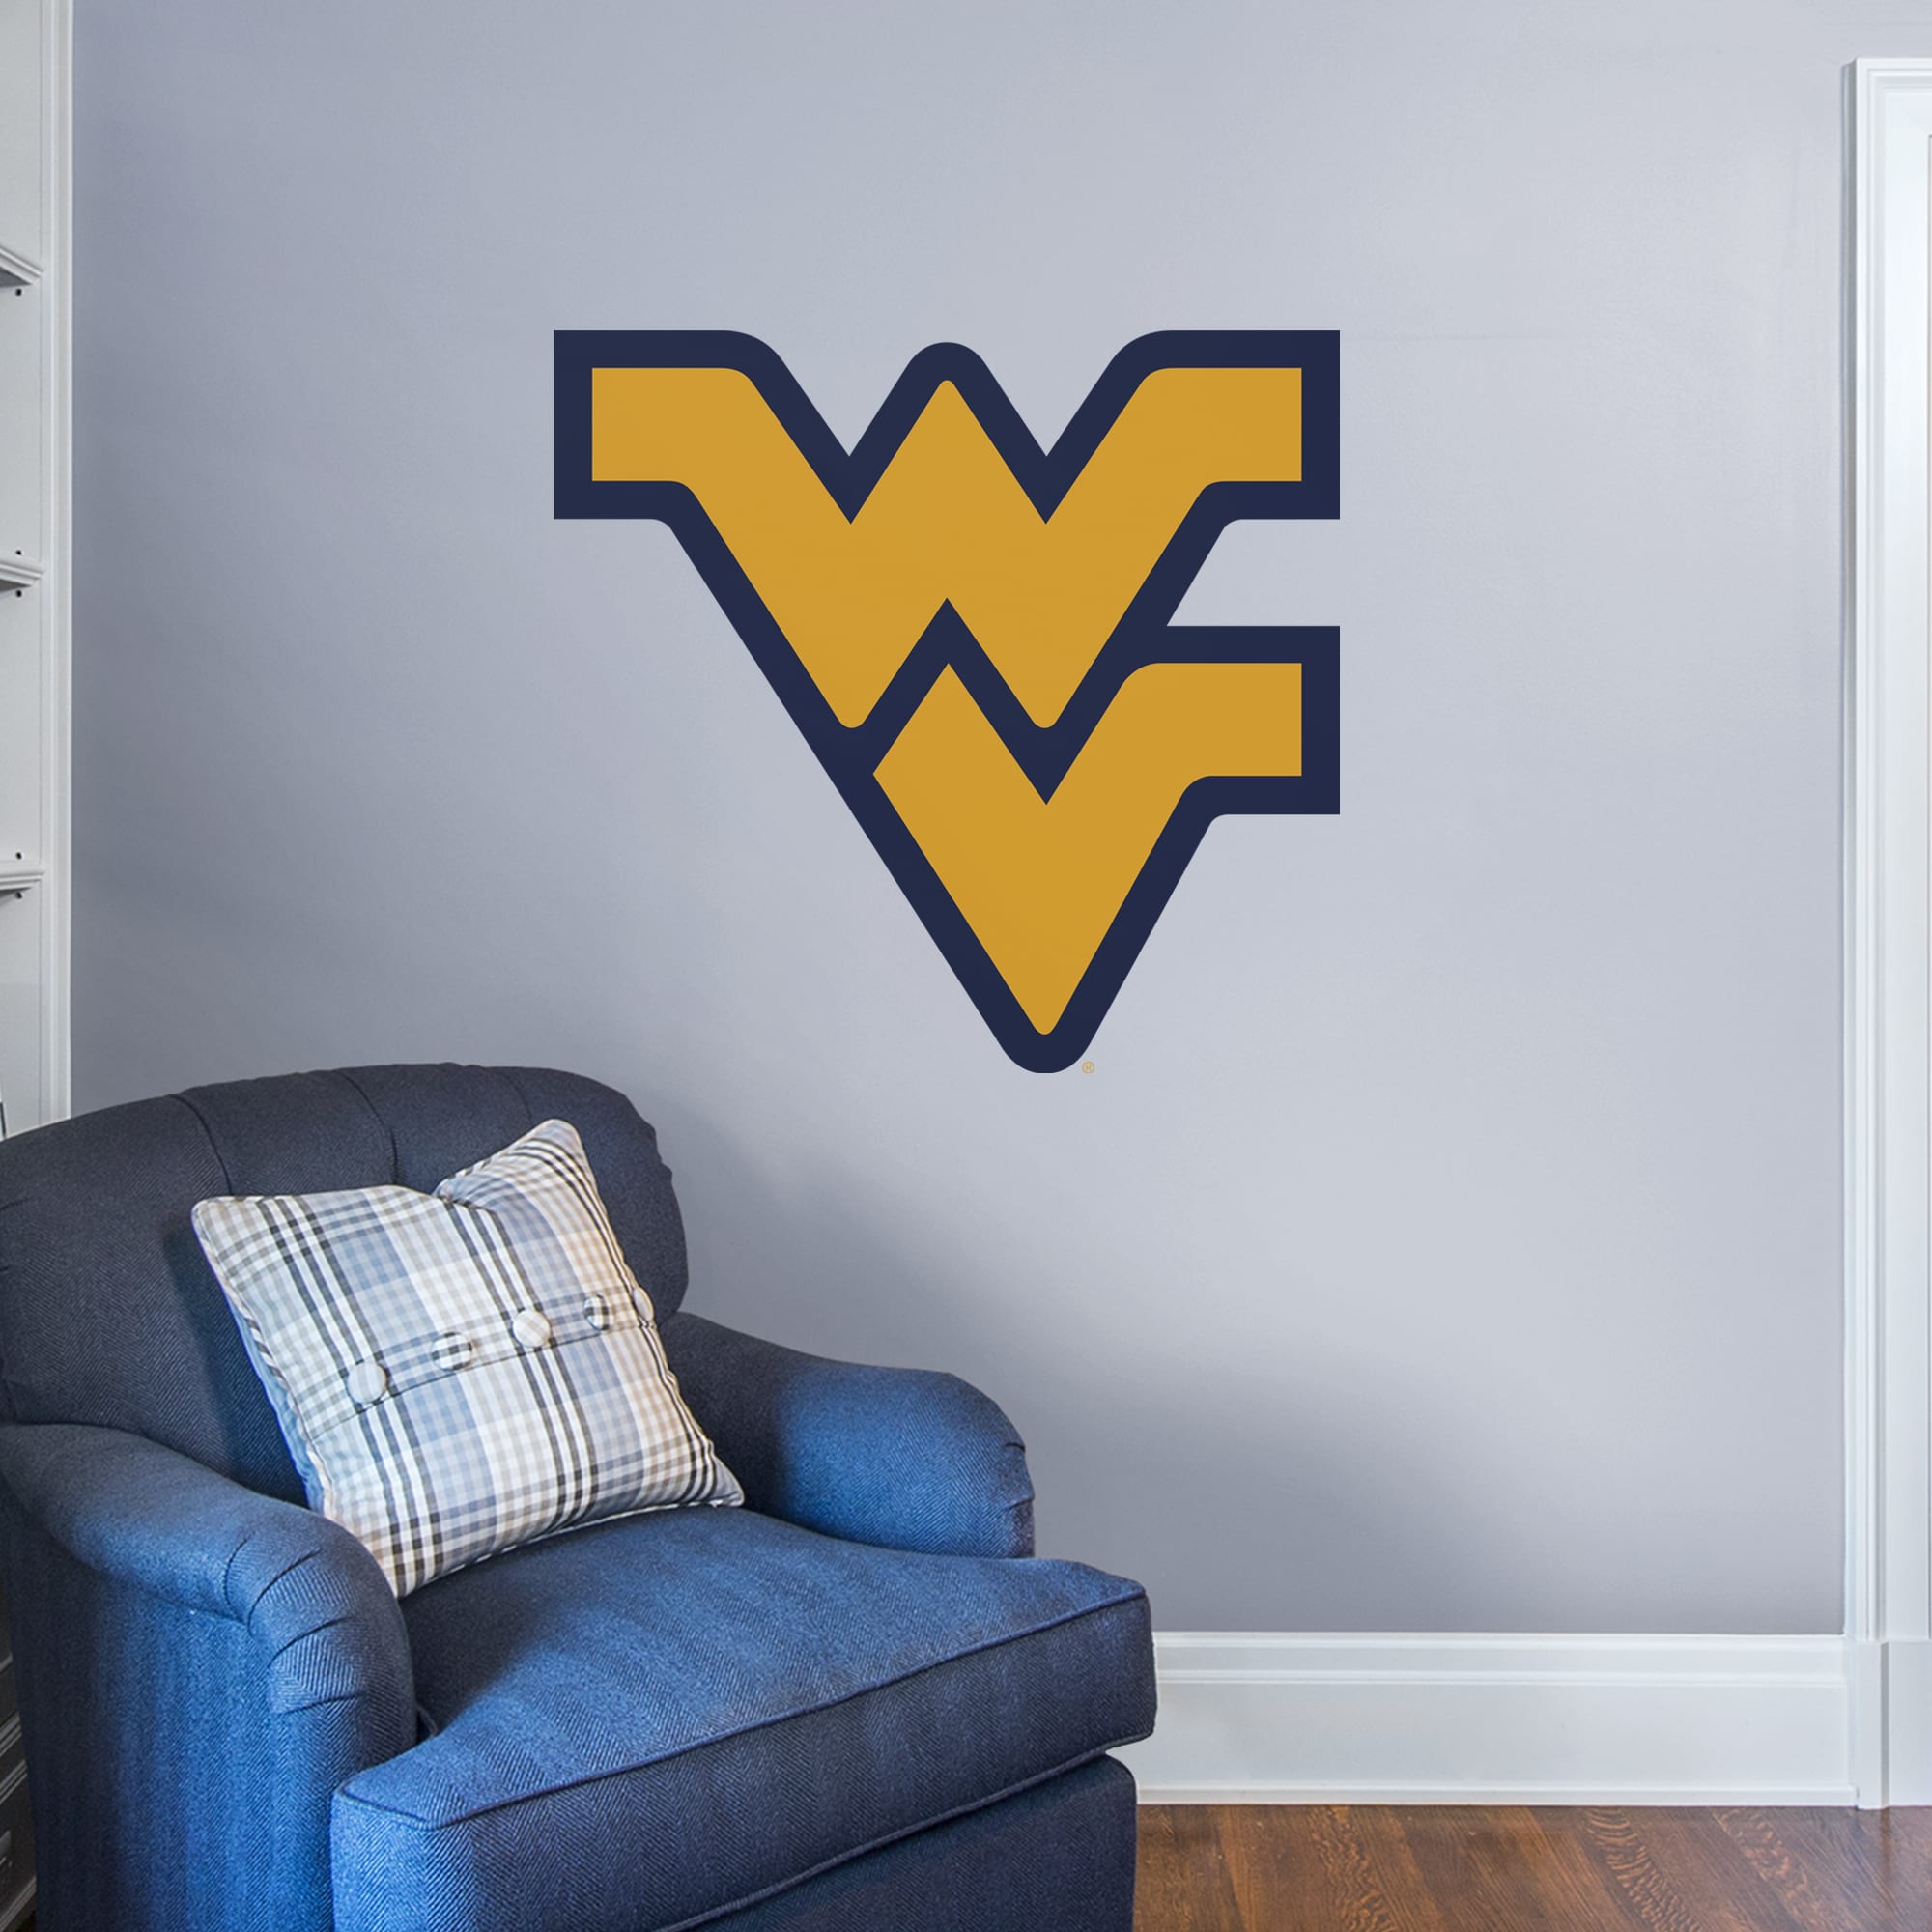 West Virginia Mountaineers: Logo - Officially Licensed Removable Wall Decal Giant Logo (41"W x 38"H) by Fathead | Vinyl